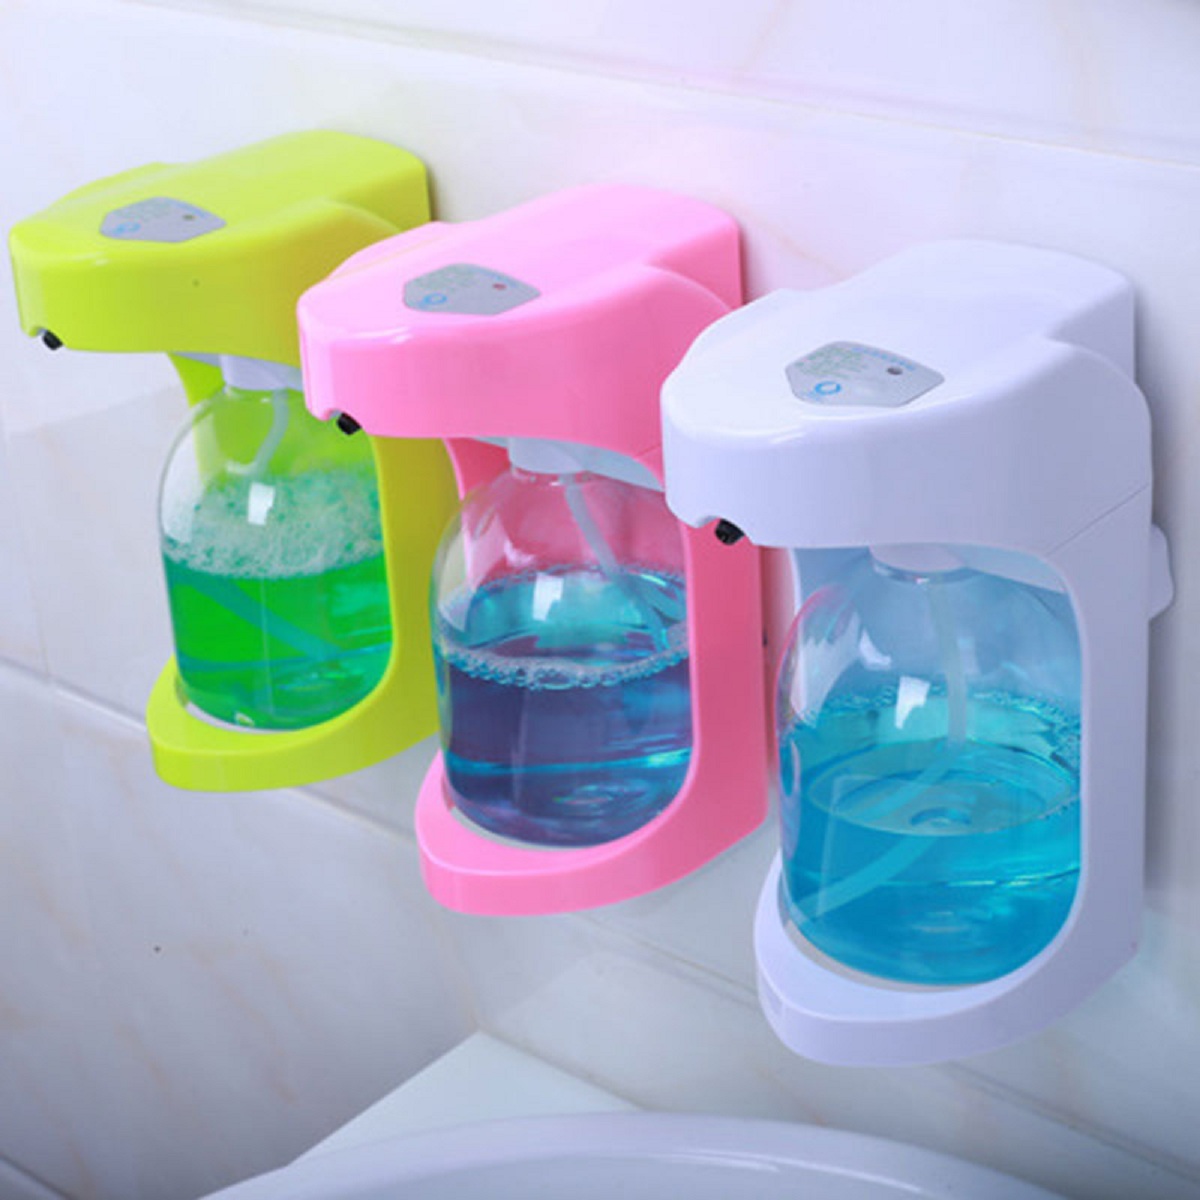 Automatic-Foam-Hand-Washing-Machine-Induction-Soap-Dispenser-Liquid-Bottle-Stand-Wall-Hanging-Intell-1585566-4